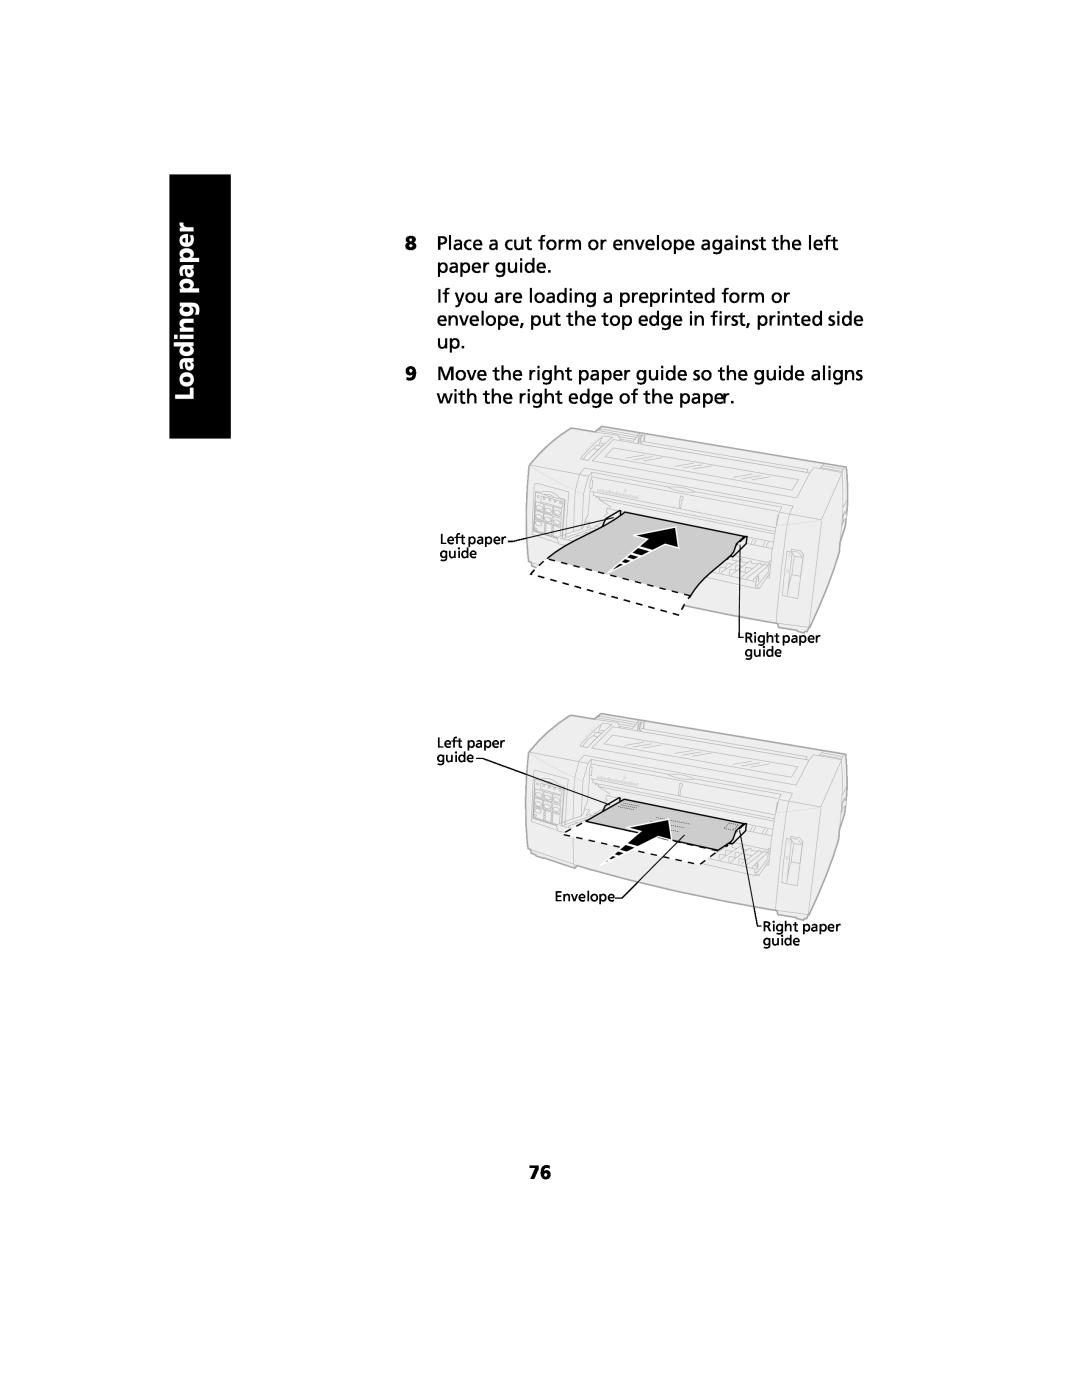 Lexmark 2480 manual Loading paper, Place a cut form or envelope against the left paper guide 